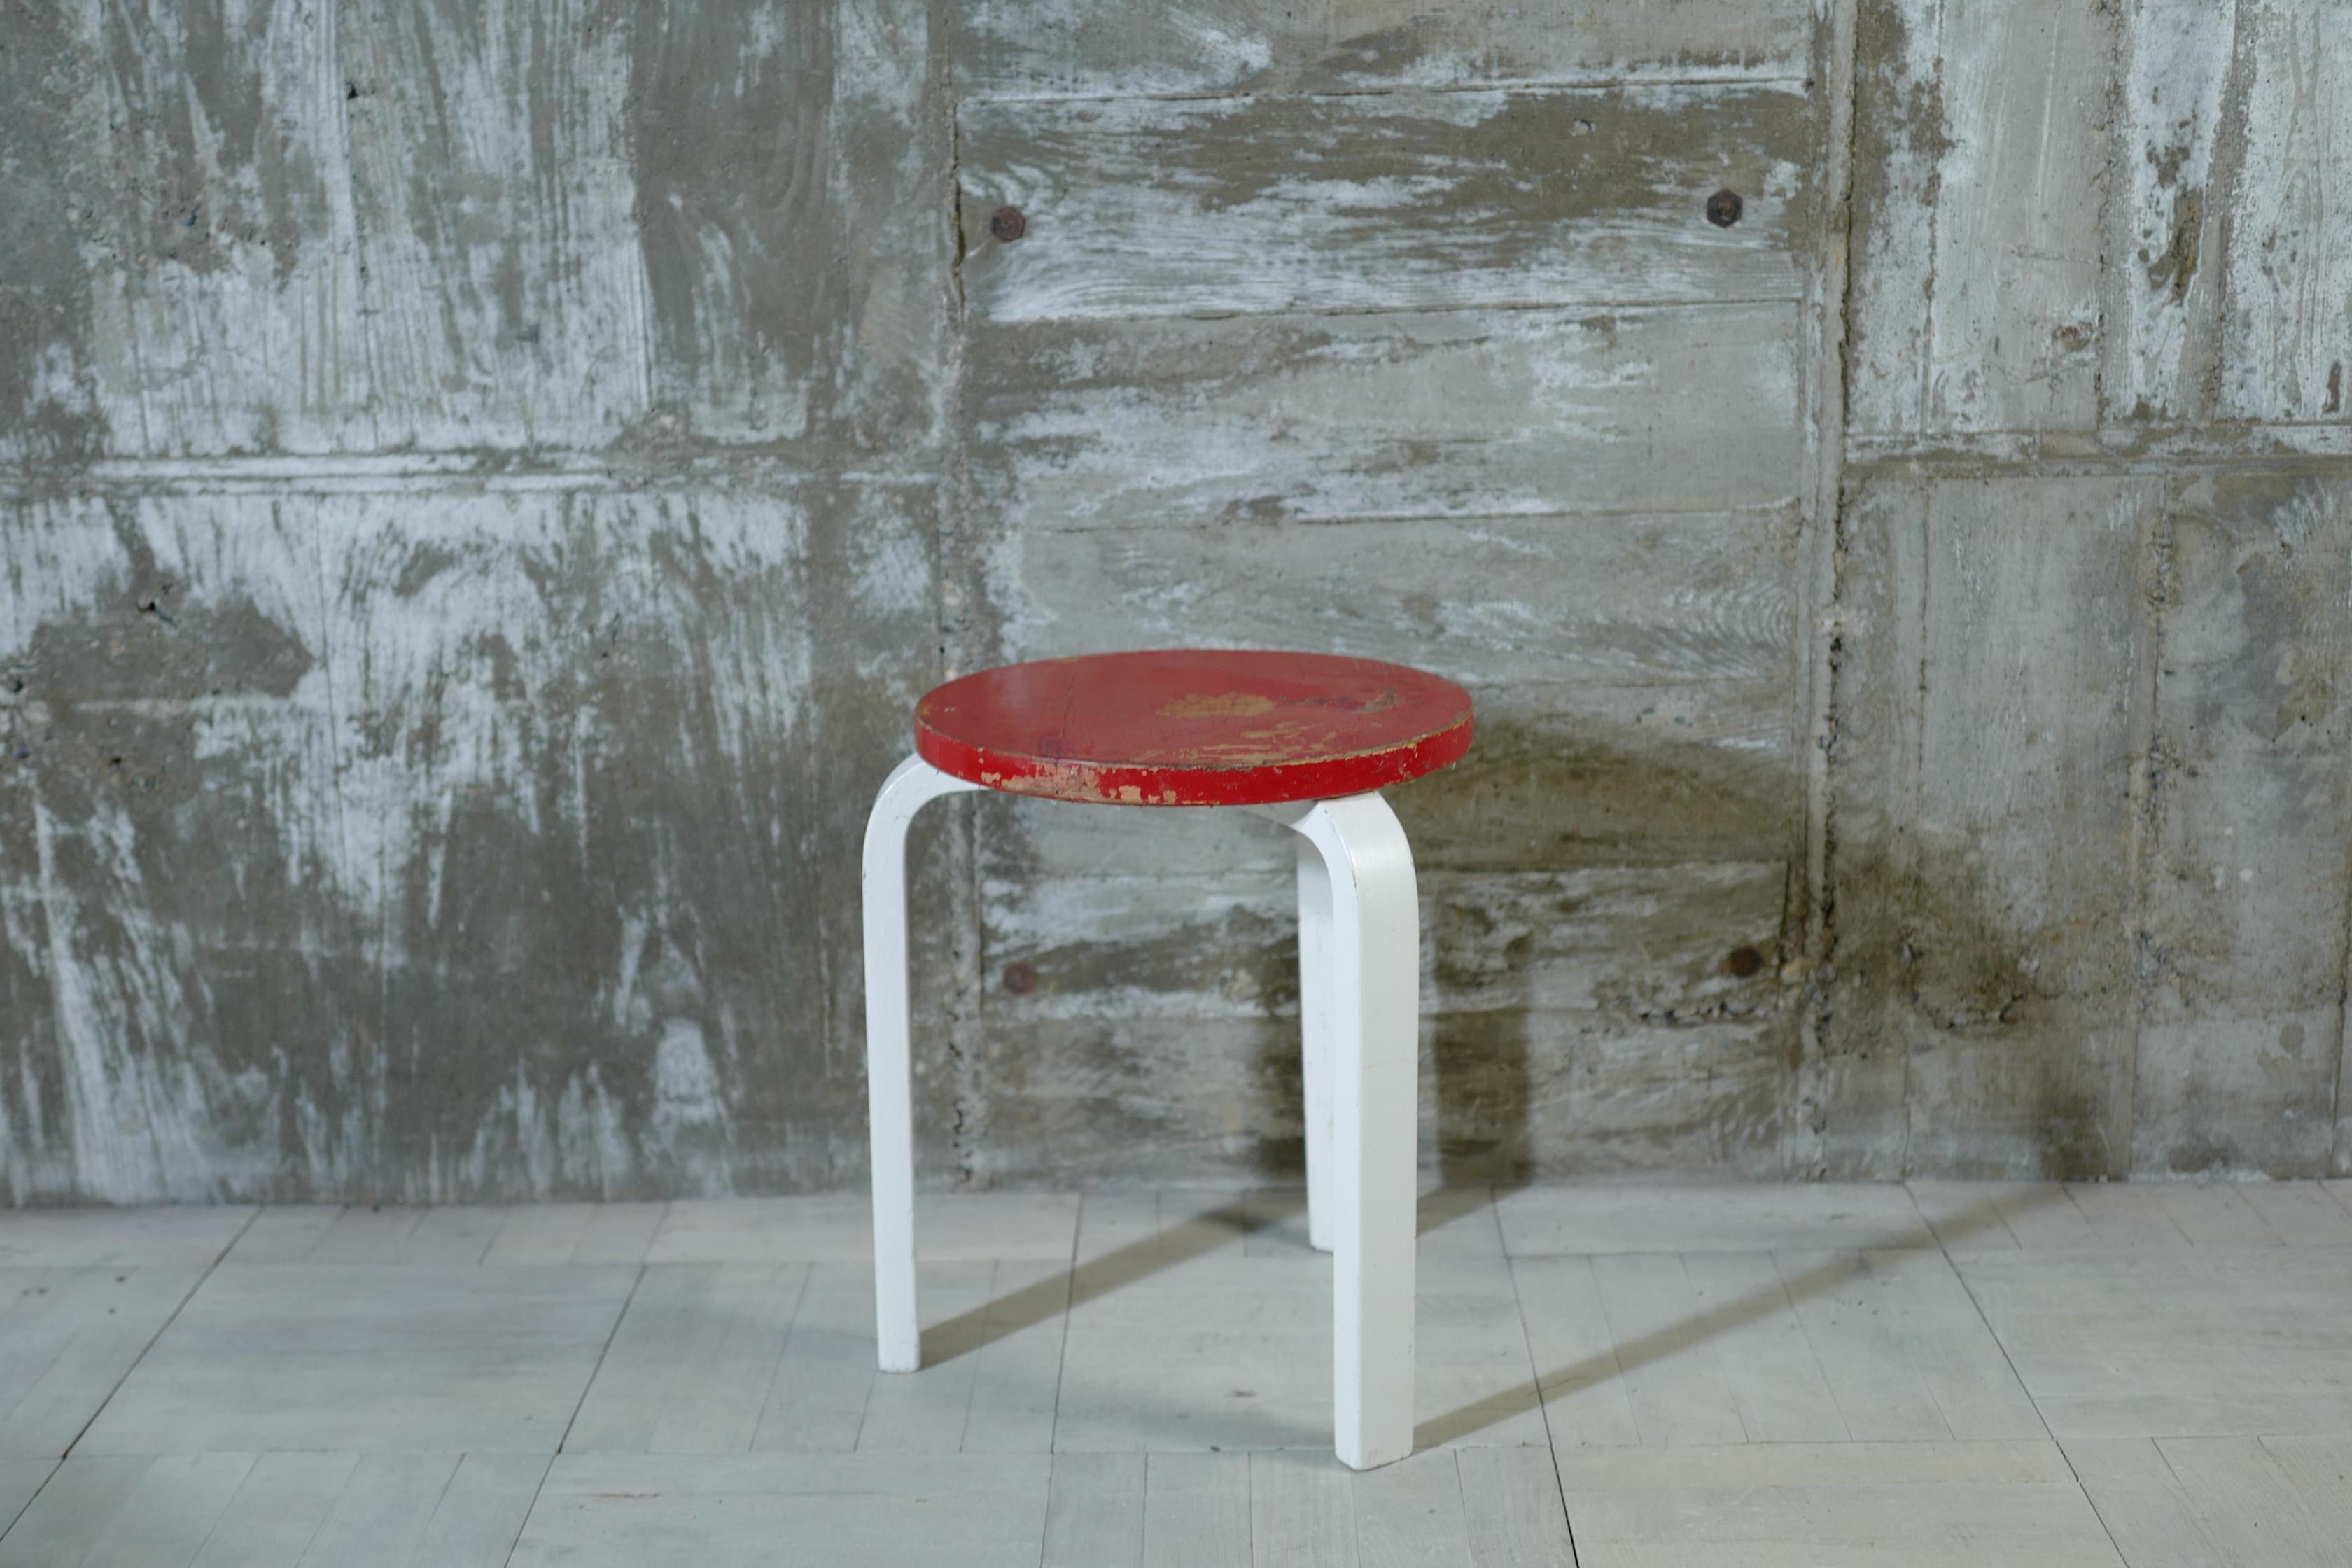 Designed by Alvar Aalto.
This stool 60 was manufactured in the 1930's.
This stool is painted red and white.
There is some peeling and damage in the paint here and there, but it is a cool looking individual.